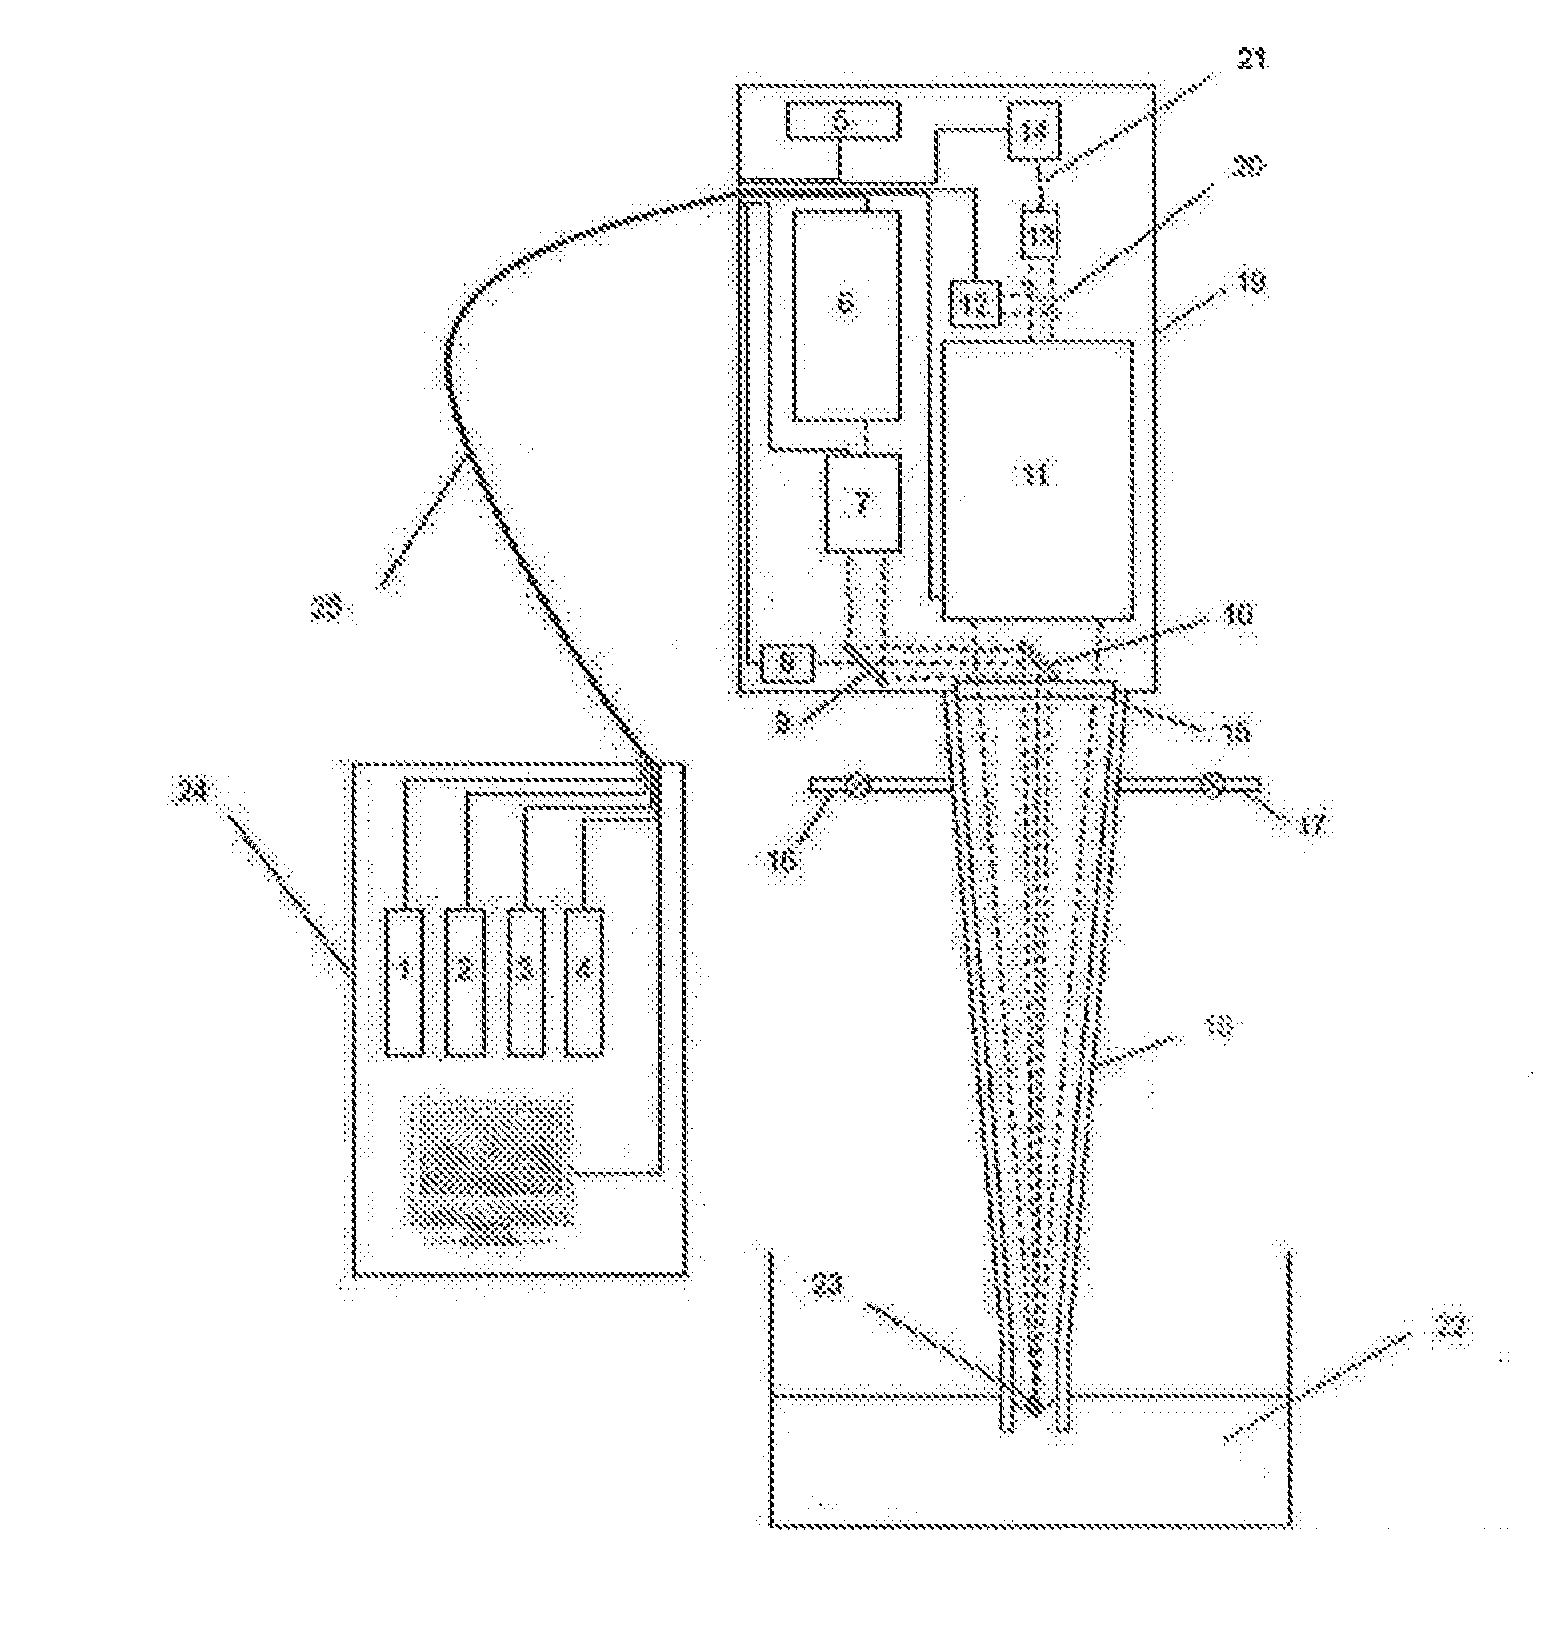 In-situ on-line detection device and method for long-distance metallurgical liquid metal component